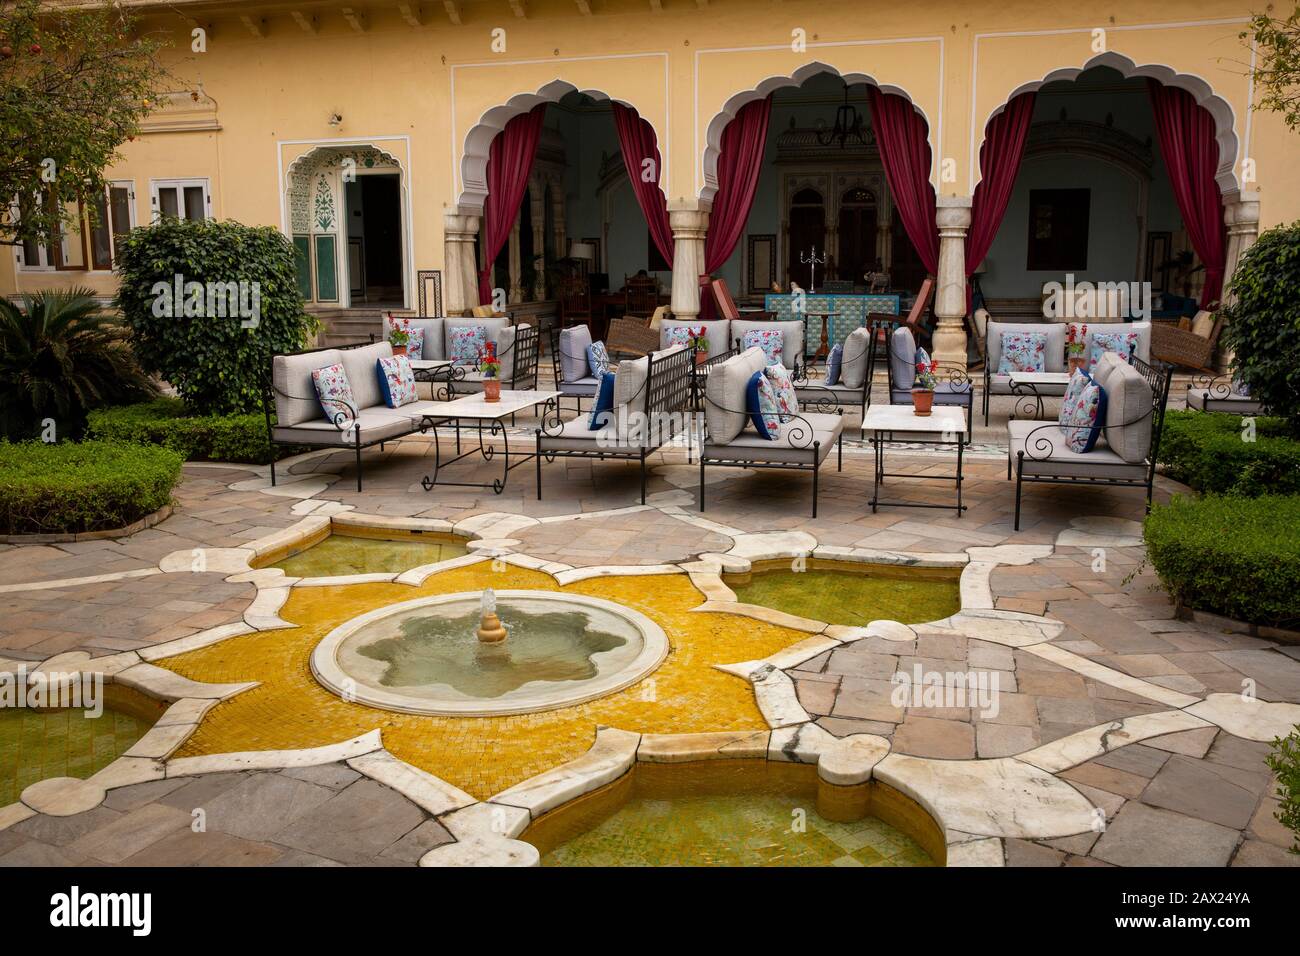 India, Rajasthan, Jaipur, Gangapole, Samode Haveli Hotel, in townhouse of Samode Royal Family, sitting area in courtyard amongst water feature Stock Photo